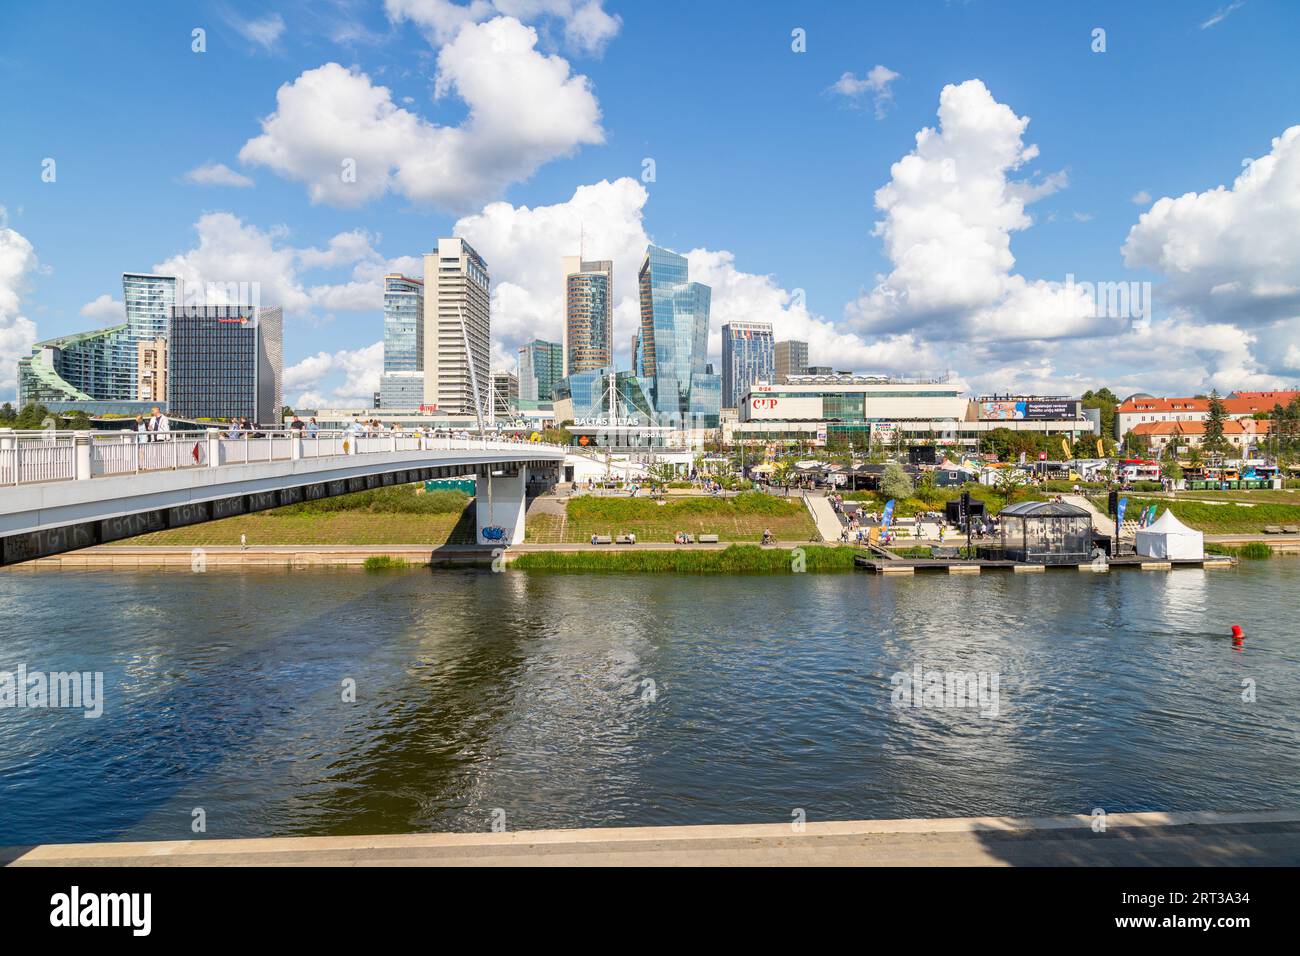 VILNIUS, LITHUANIA - 3RD SEPT 2023: A view across the Neris River showing the Baltasis tiltas bridge, lots of people and buildings. Stock Photo